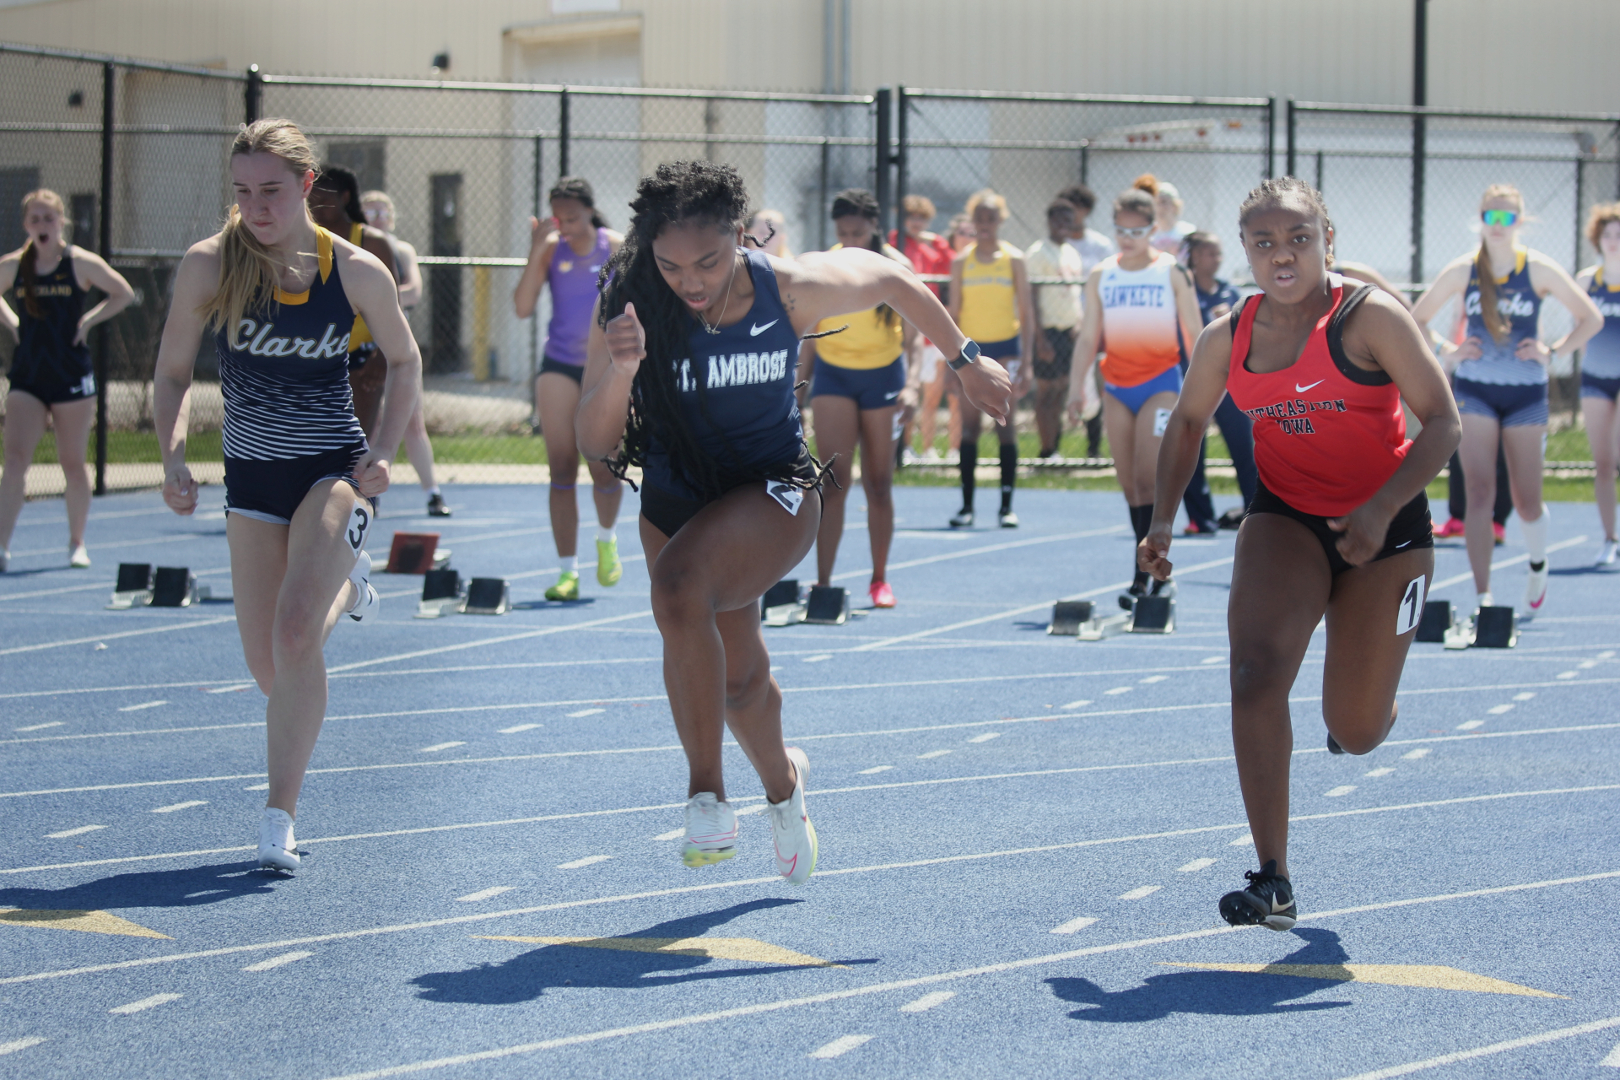 Track & Field competed in a plethora of outdoor events in a two-day span